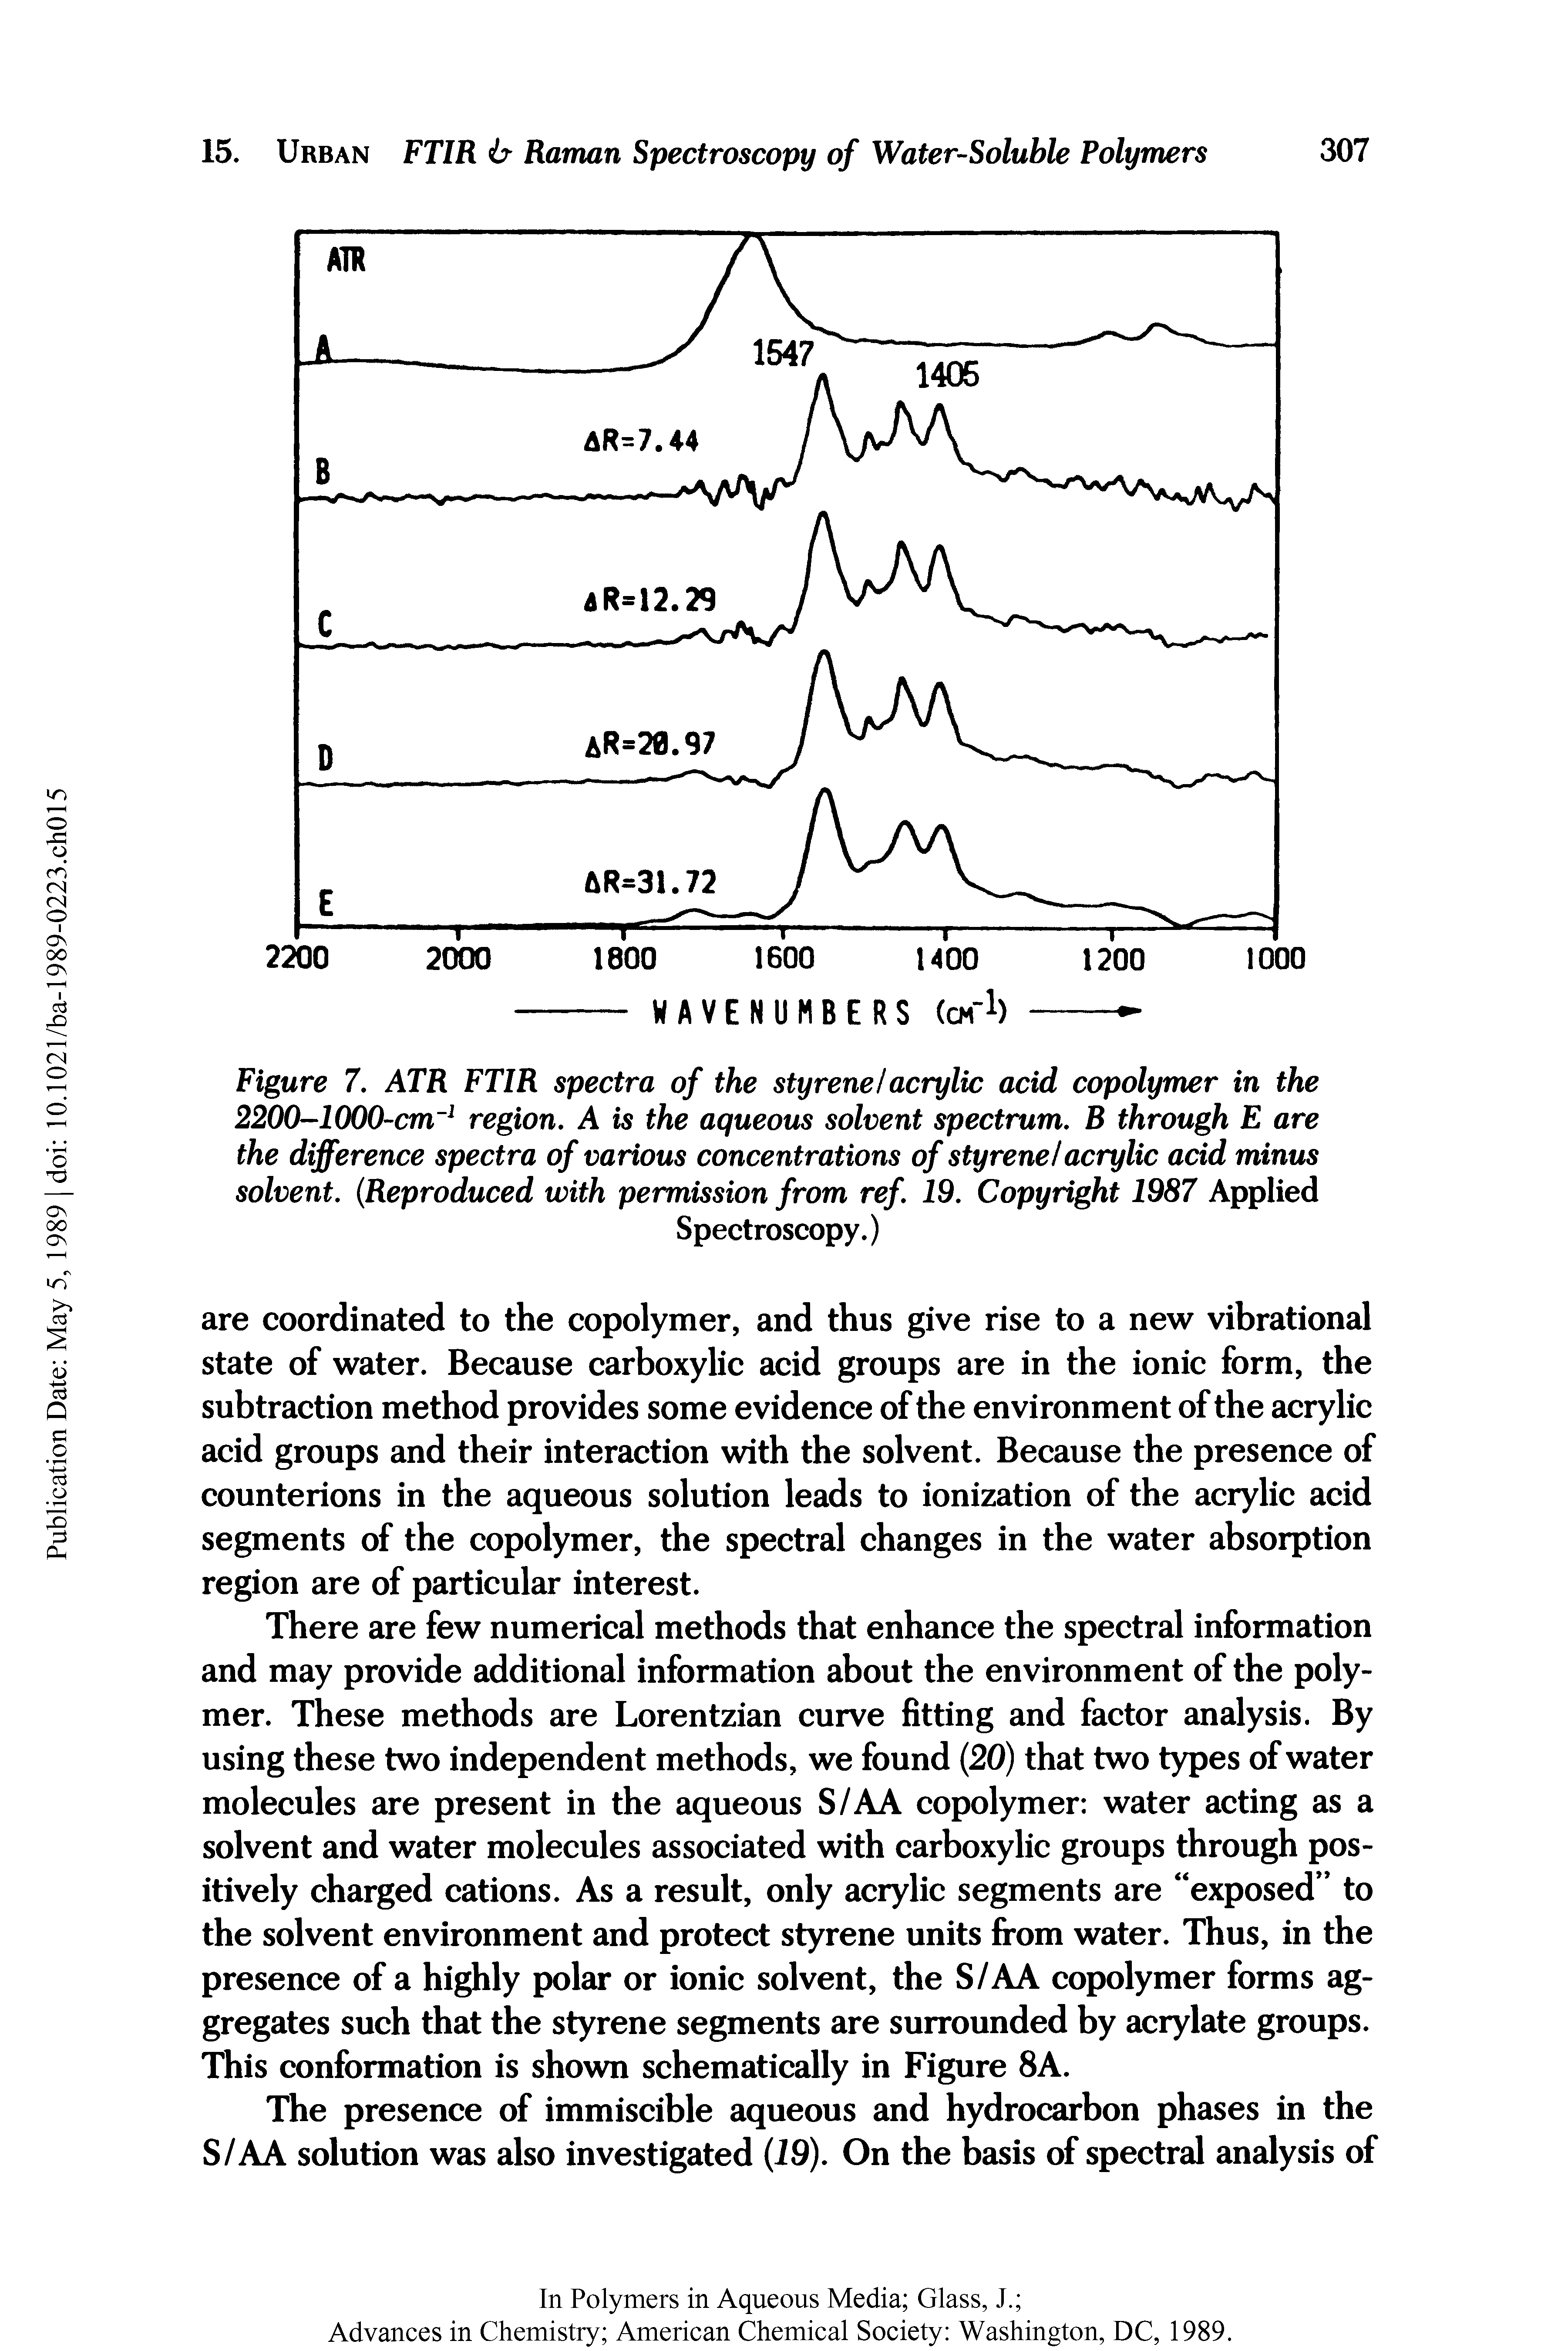 Figure 7. ATR FTIR spectra of the styrene acrylic acid copolymer in the 2200-1000-cm region. A is the aqueous solvent spectrum. B through E are the difference spectra of various concentrations of styrene acrylic acid minus solvent. Reproduced with permission from ref. 19. Copyright 1987 Applied...